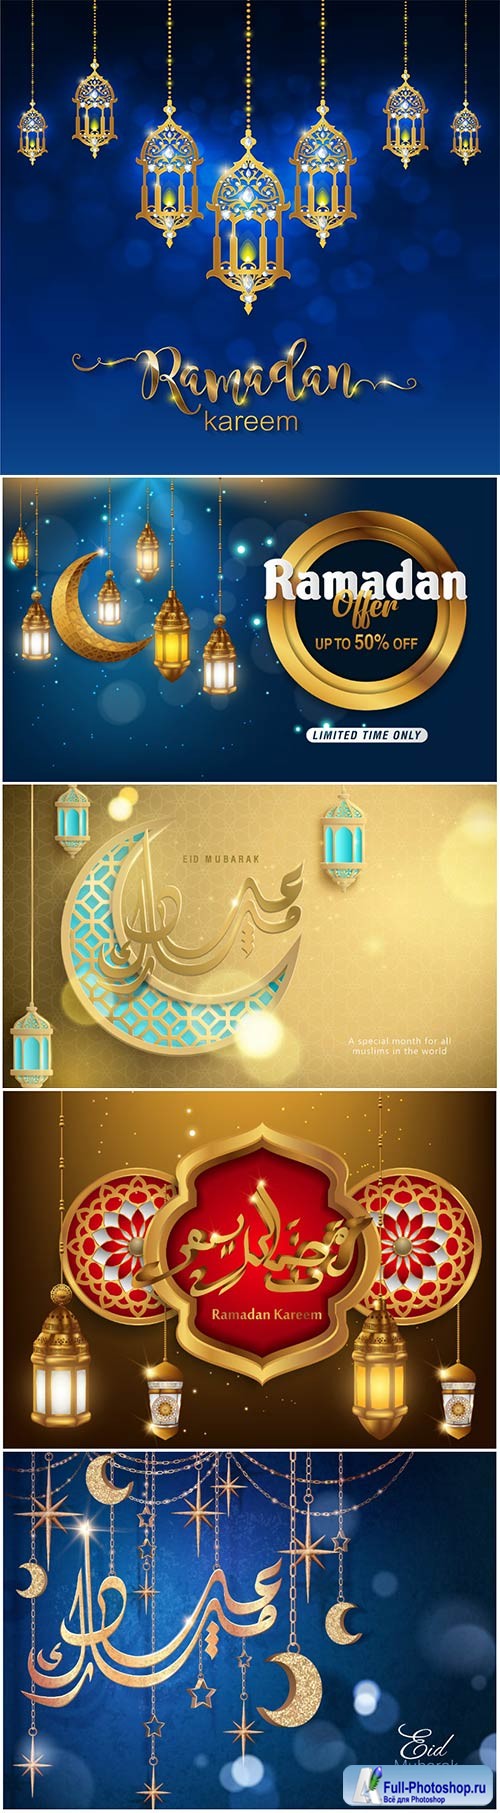 Ramadan Kareem vector calligraphy design with decorative floral pattern, mosque silhouette, crescent and glittering islamic background # 60